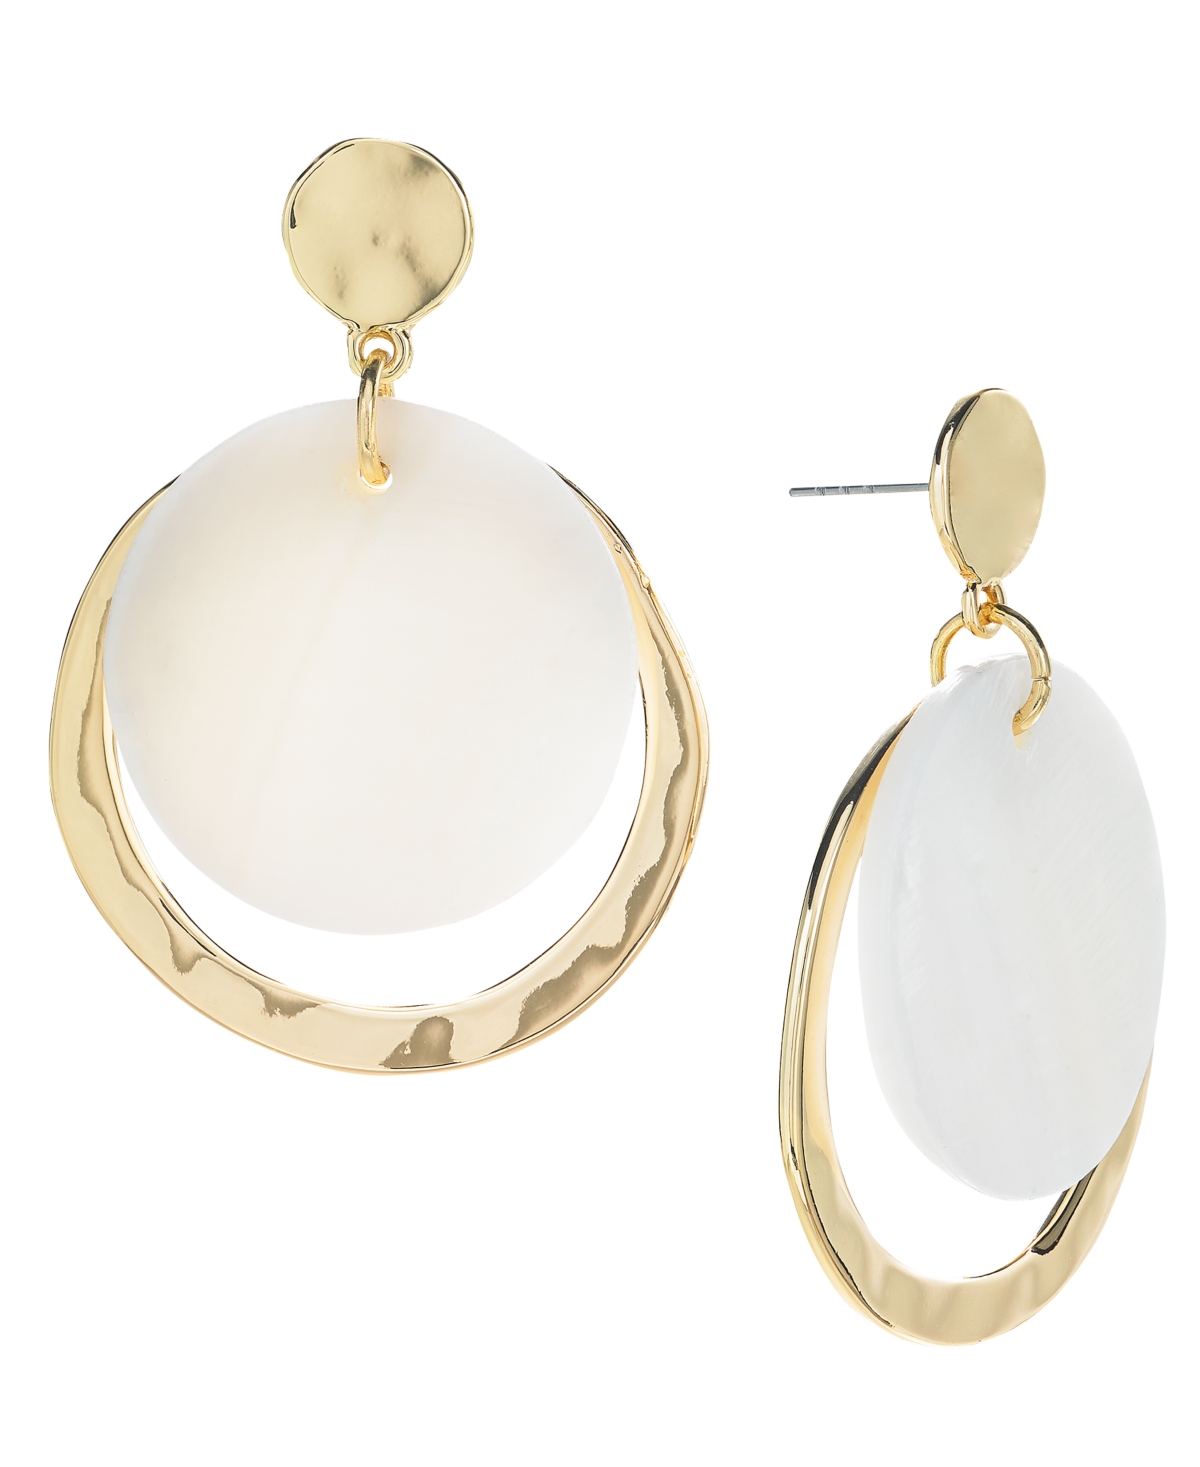 Gold-Tone Crescent Drop Earrings, Created for Macy's - Pink